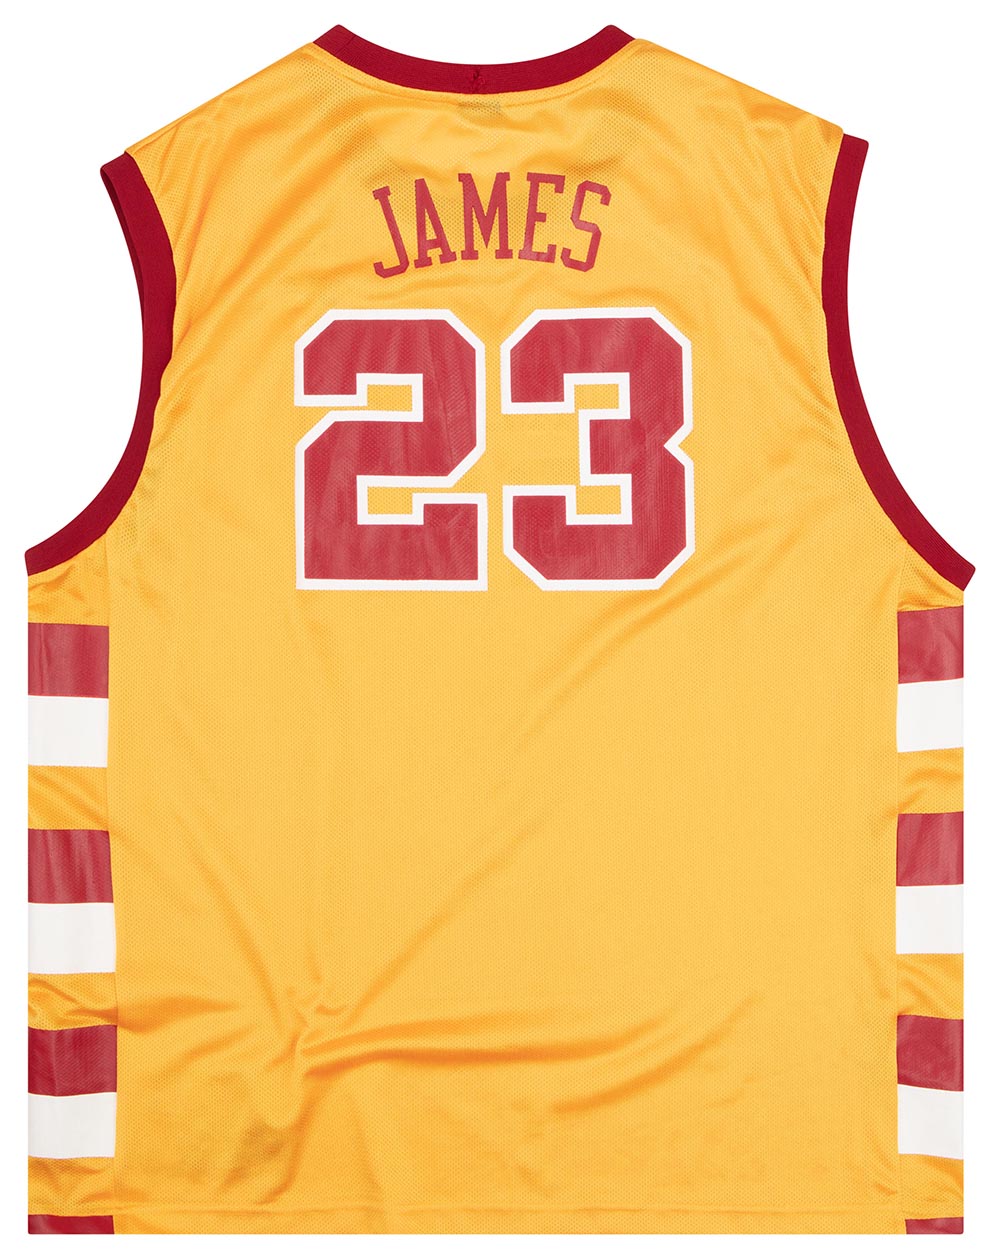 lebron old jersey